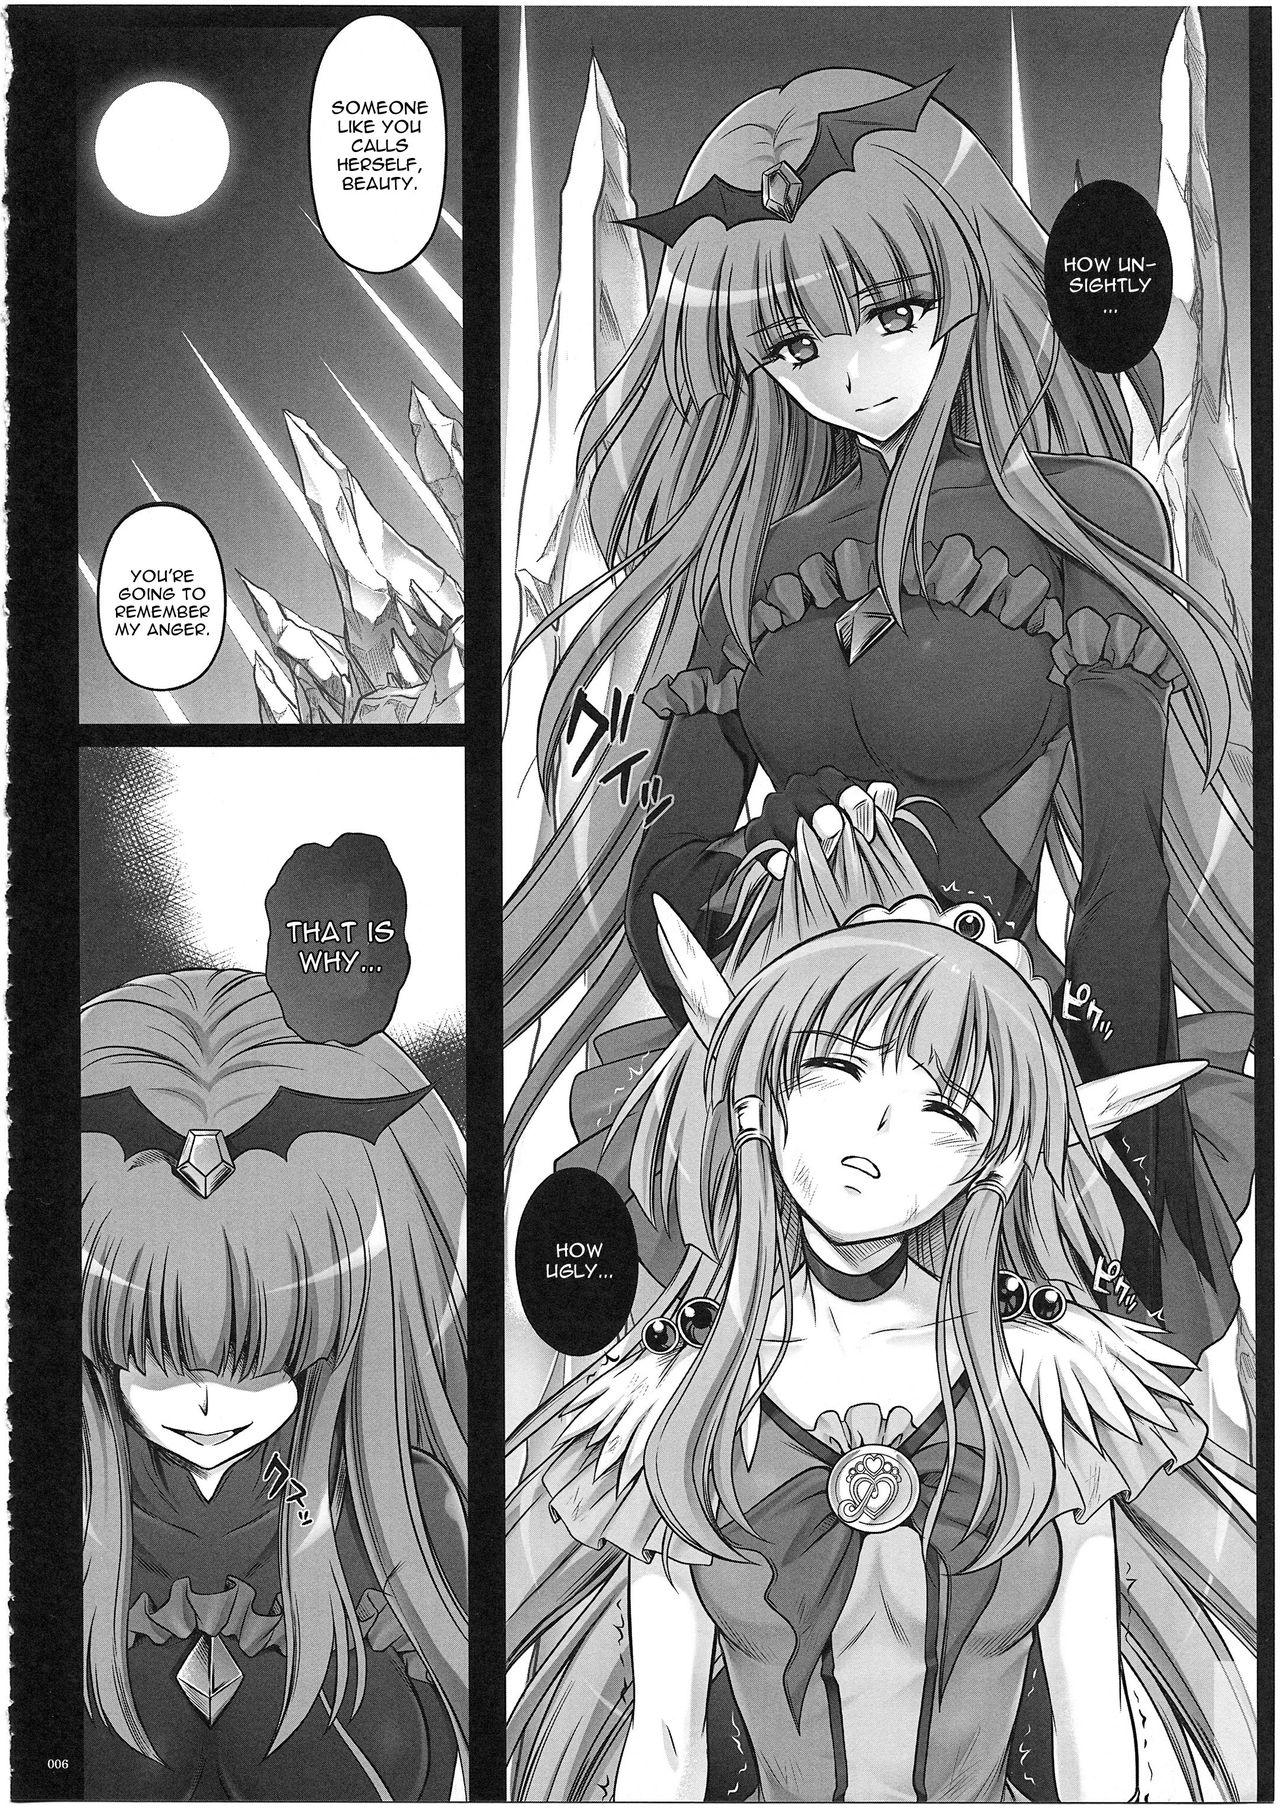 Culote Situation Note 1003 VS Badend Beauty - Smile precure Gagging - Page 3